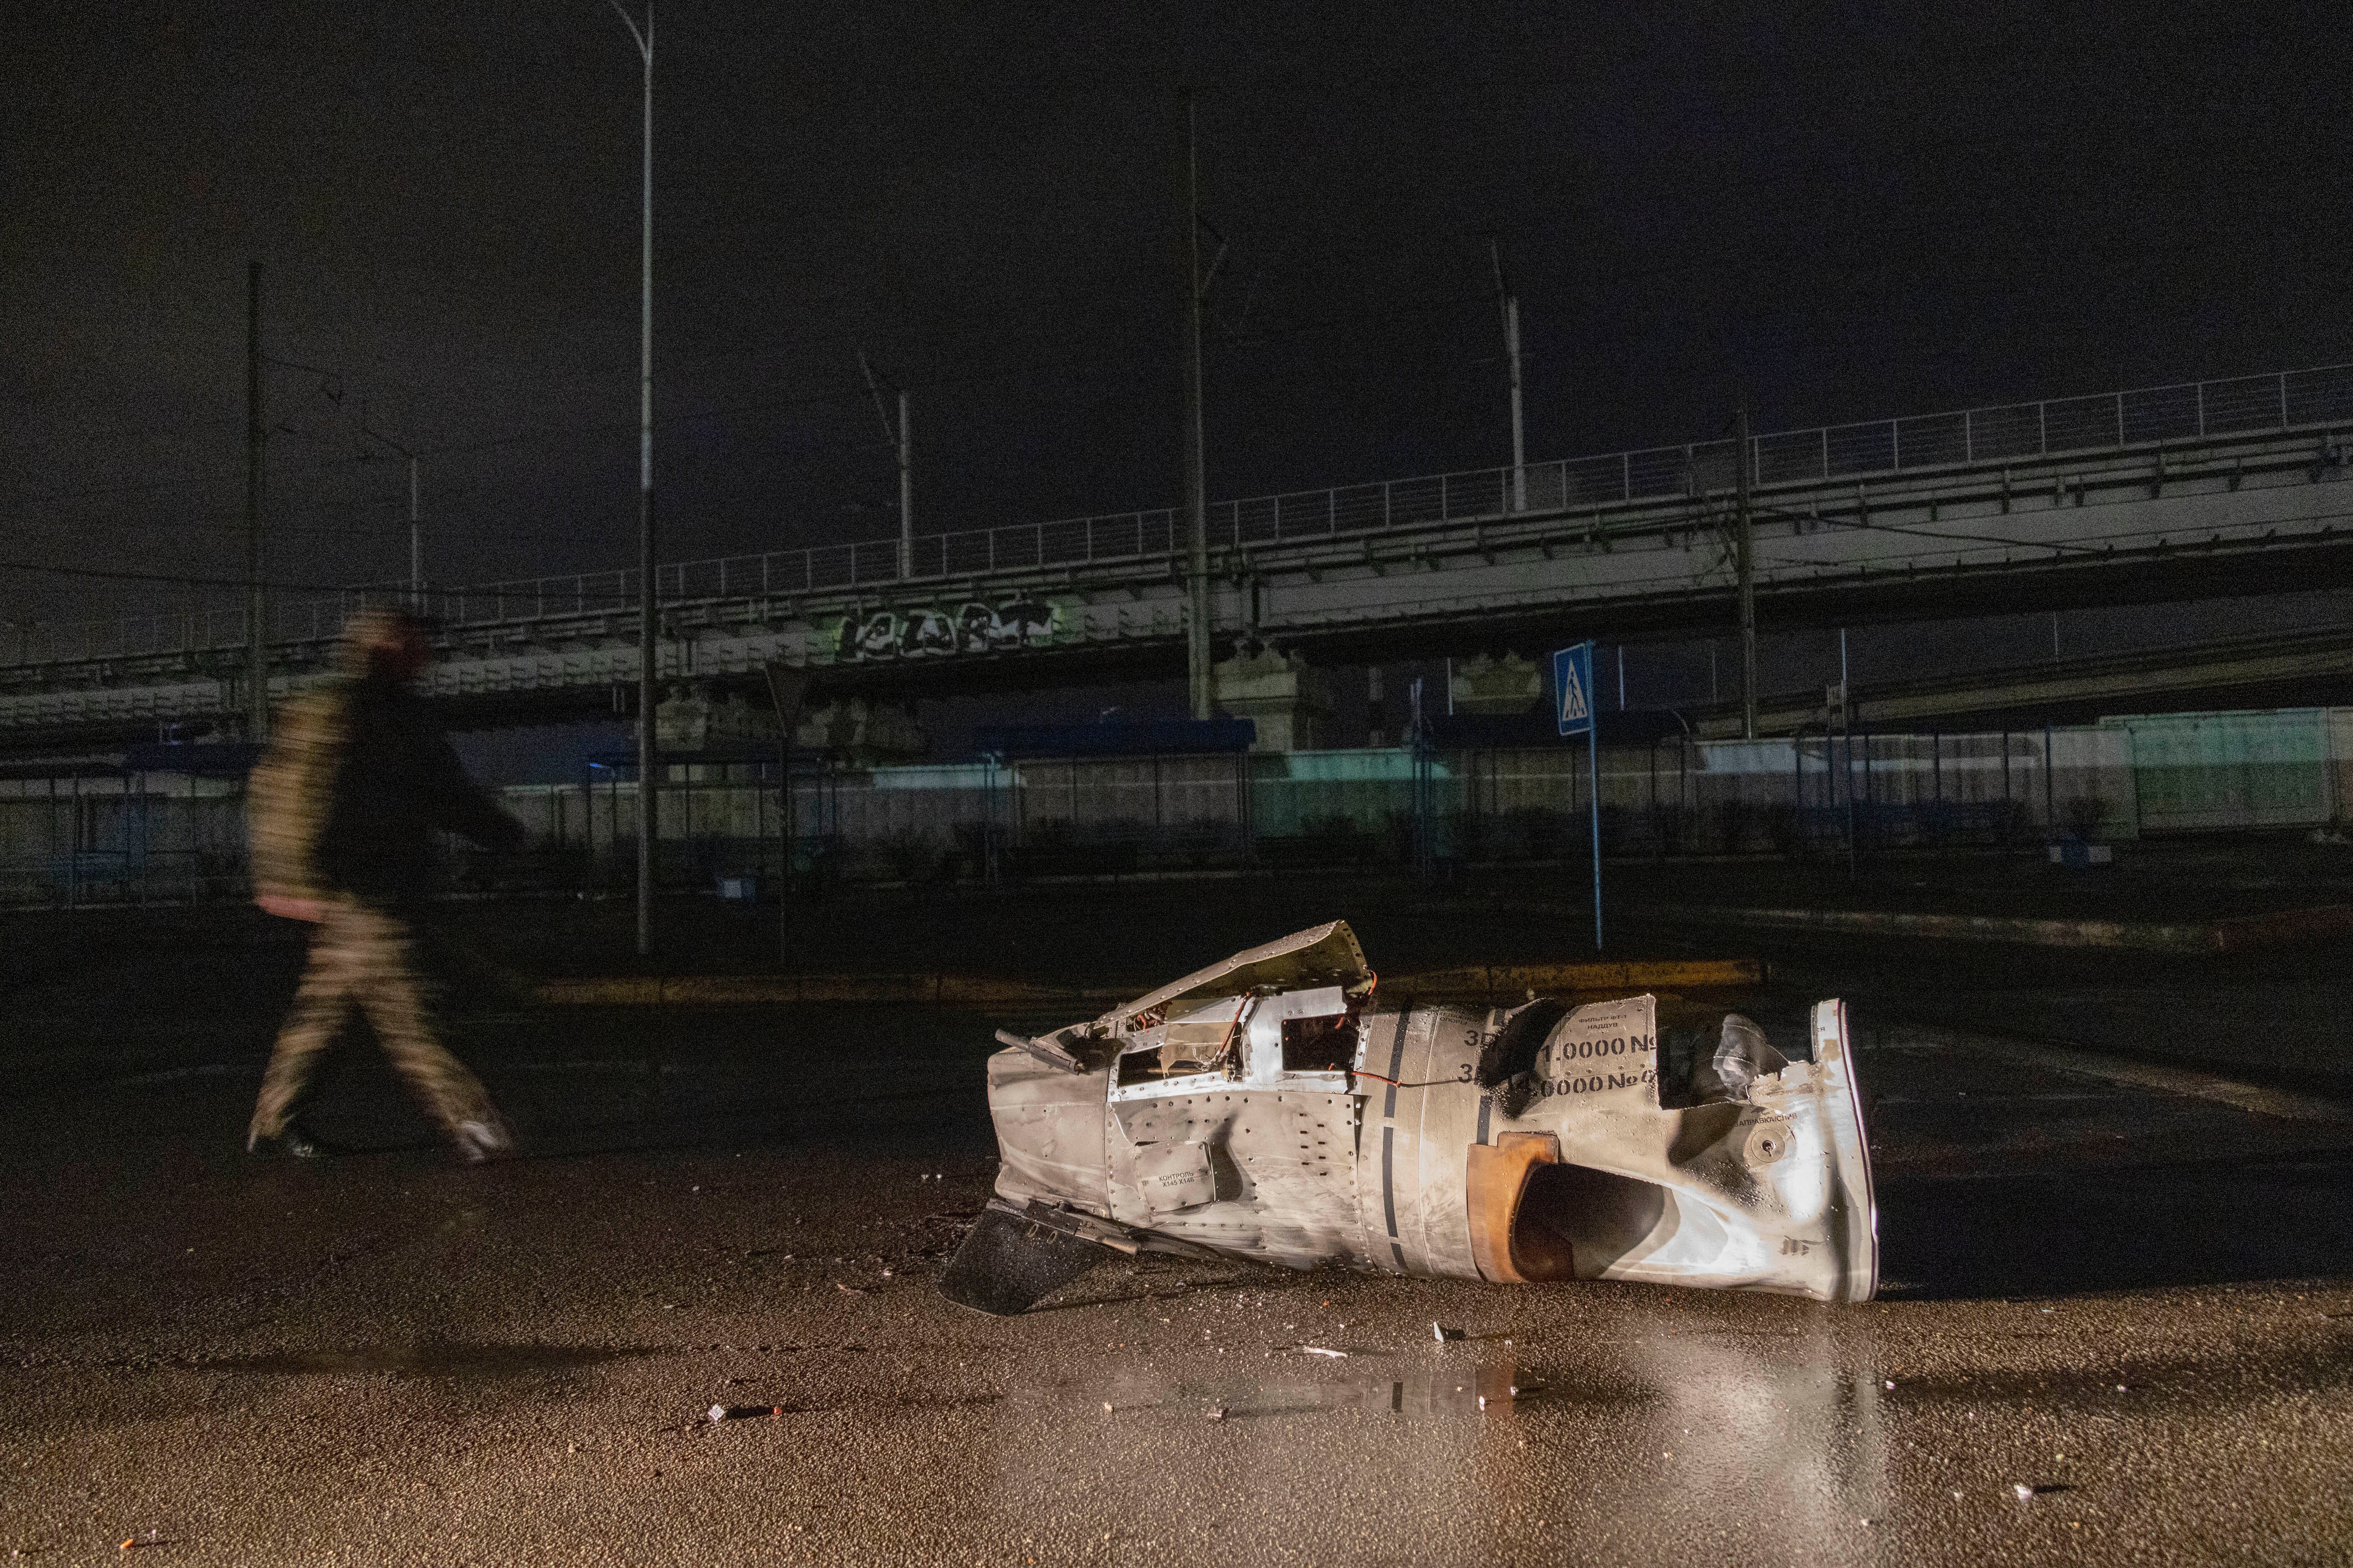 The remains of a Russian missile lies on the ground in Kyiv, Ukraine (Andriy Dubchak/AP)